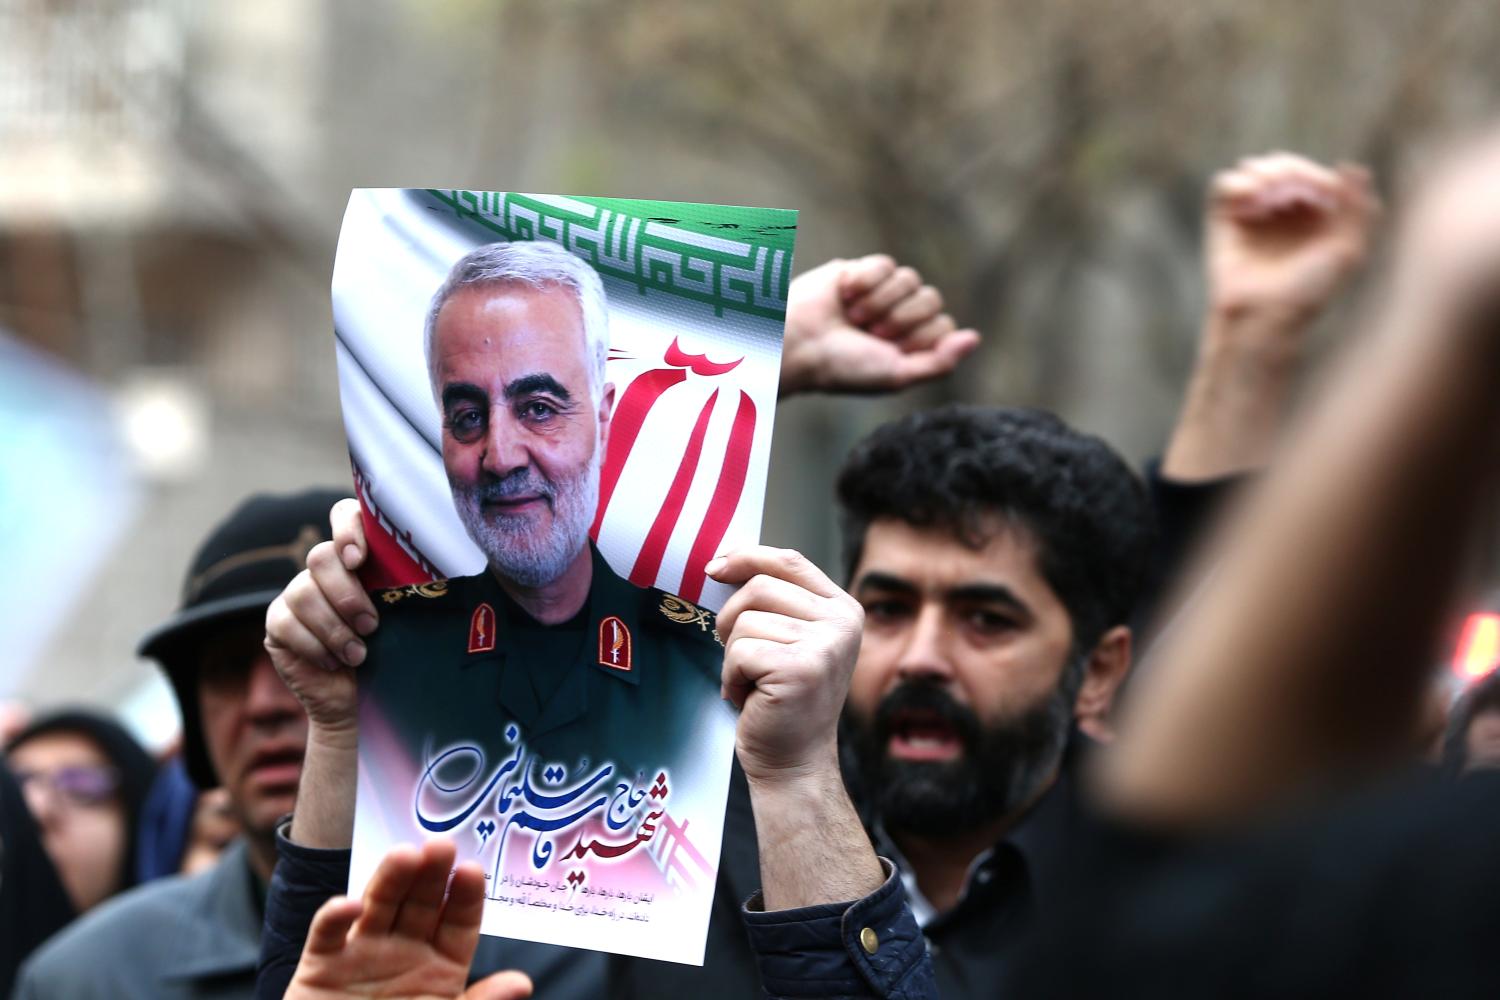 Iranian demonstrators chant slogans during a protest against the assassination of the Iranian Major-General Qassem Soleimani, head of the elite Quds Force, and Iraqi militia commander Abu Mahdi al-Muhandis, who were killed in an air strike at Baghdad airport, in front of United Nation office in Tehran, Iran January 3, 2020. WANA (West Asia News Agency)/Nazanin Tabatabaee via REUTERS ATTENTION EDITORS - THIS IMAGE HAS BEEN SUPPLIED BY A THIRD PARTY.